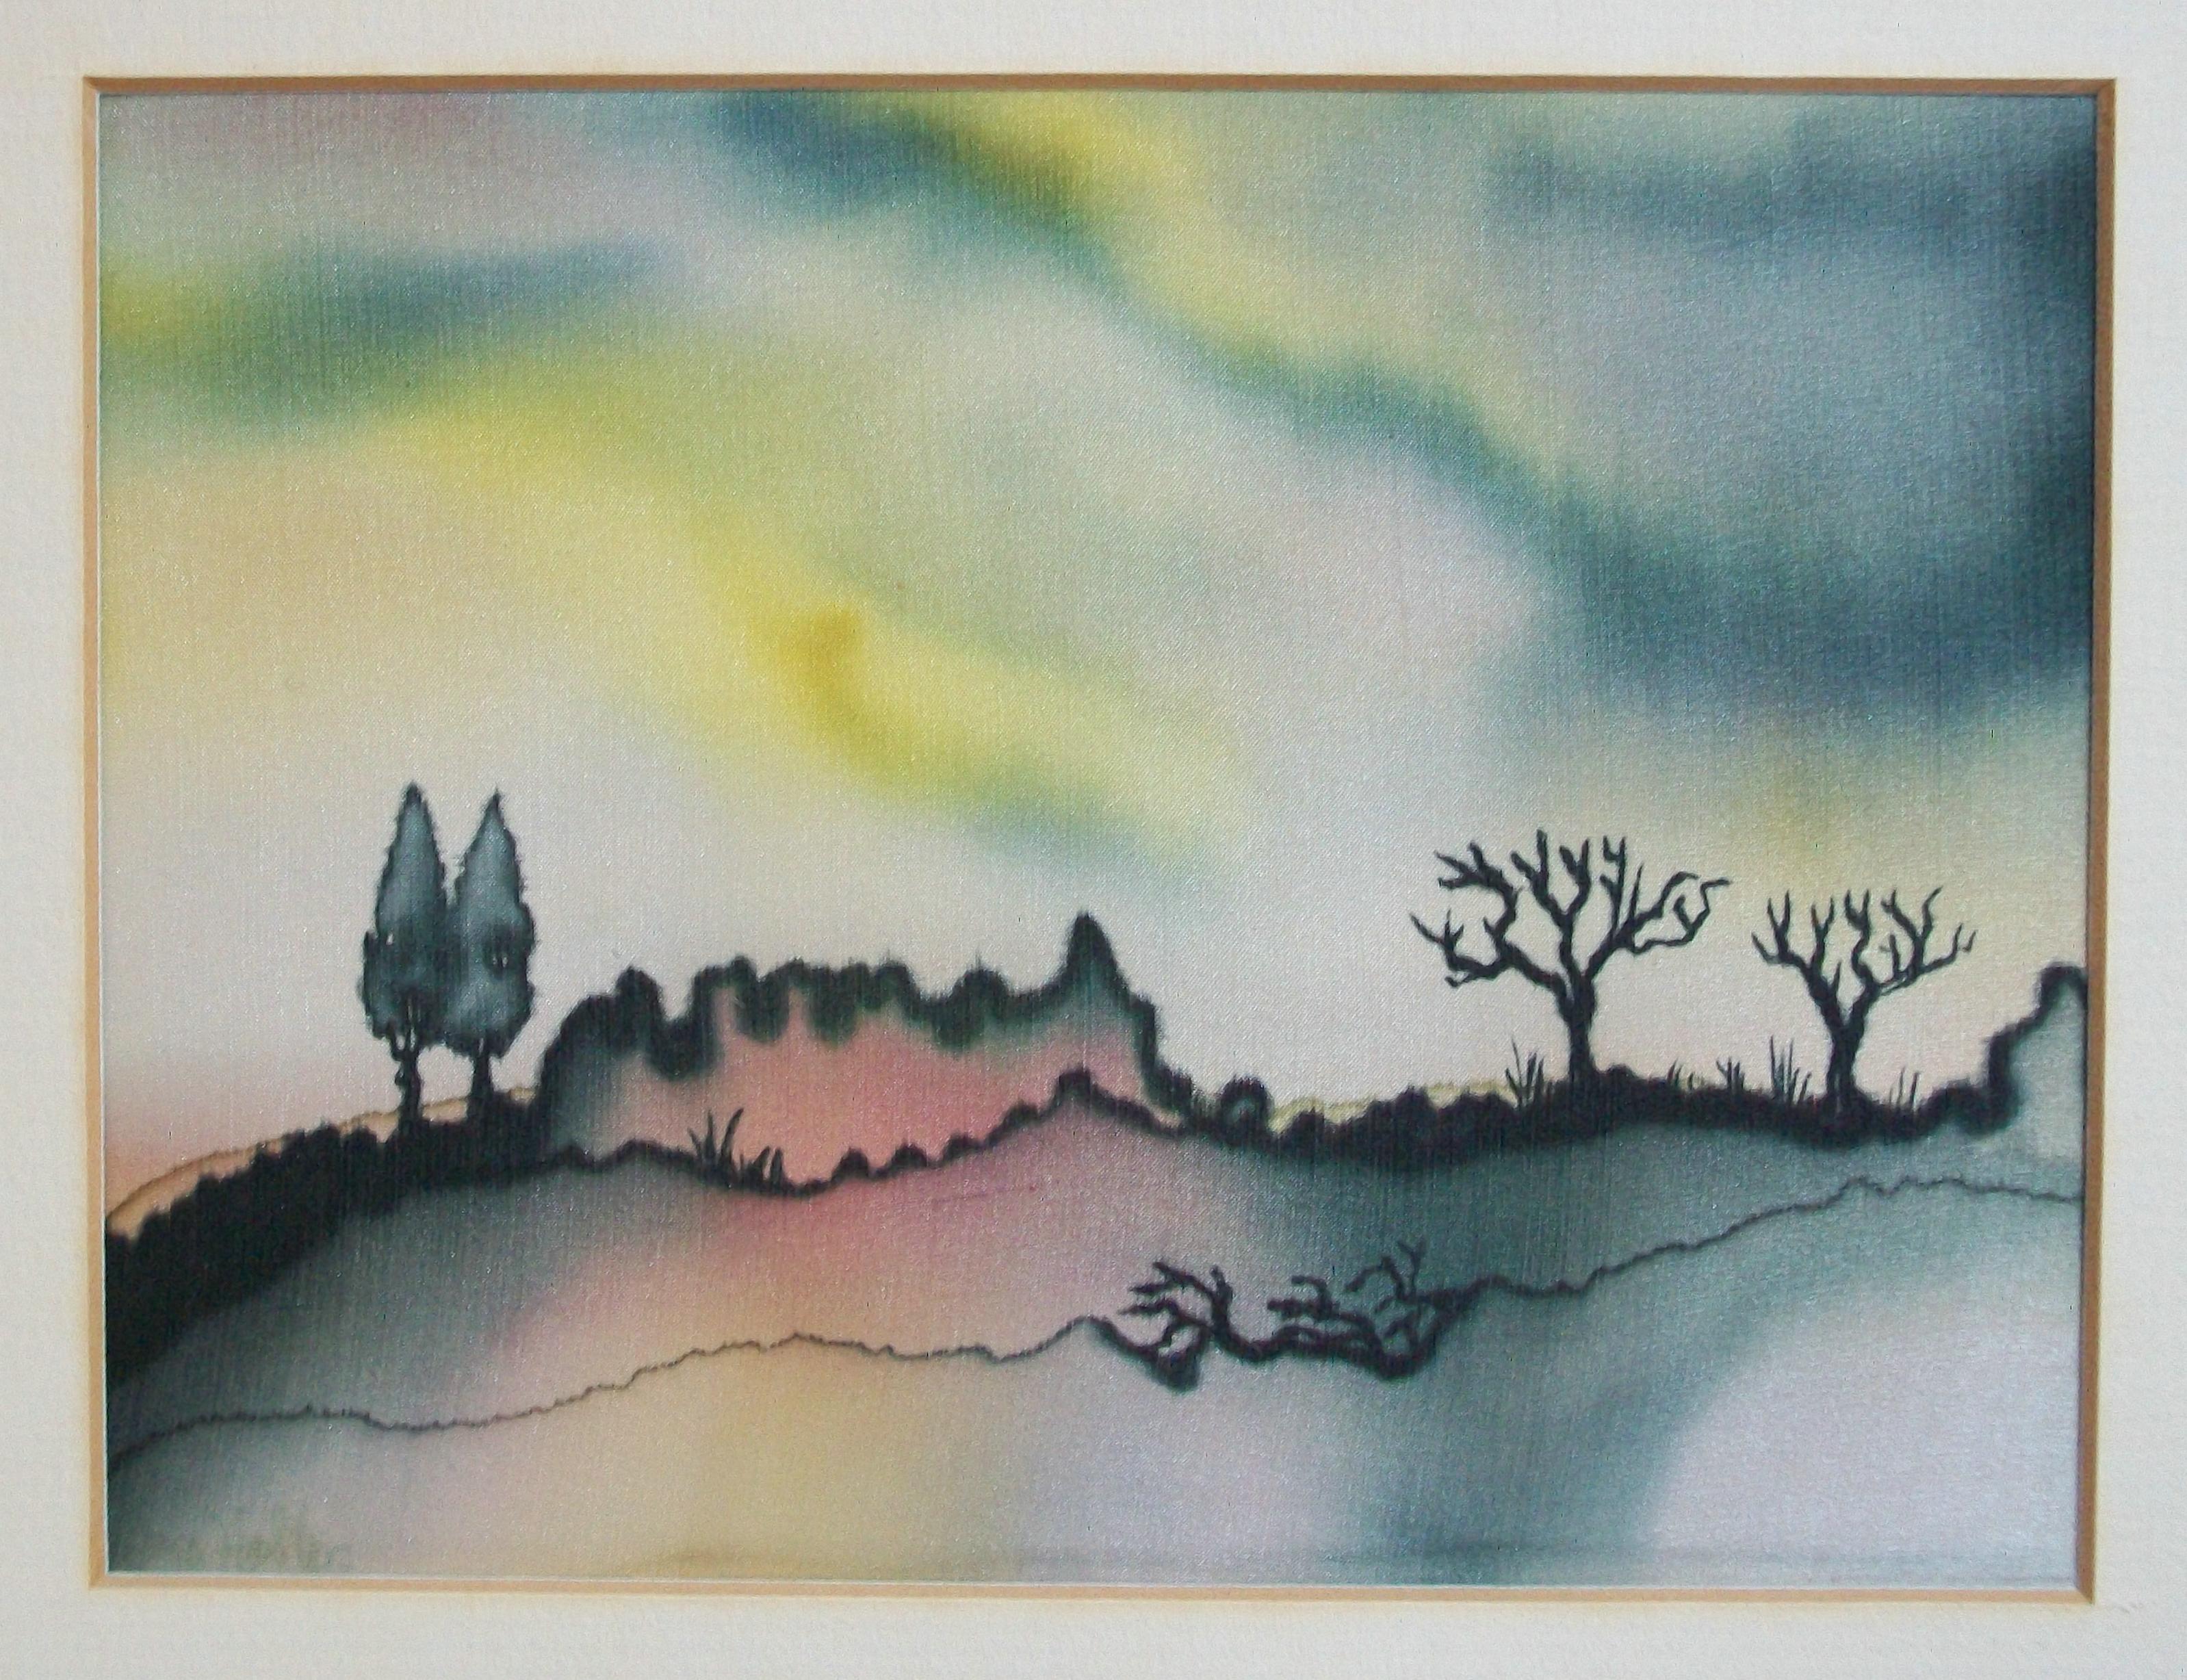 Mid-Century Modern German Expressionist Landscape Painting on Silk, Unsigned, Mid 20th Century For Sale